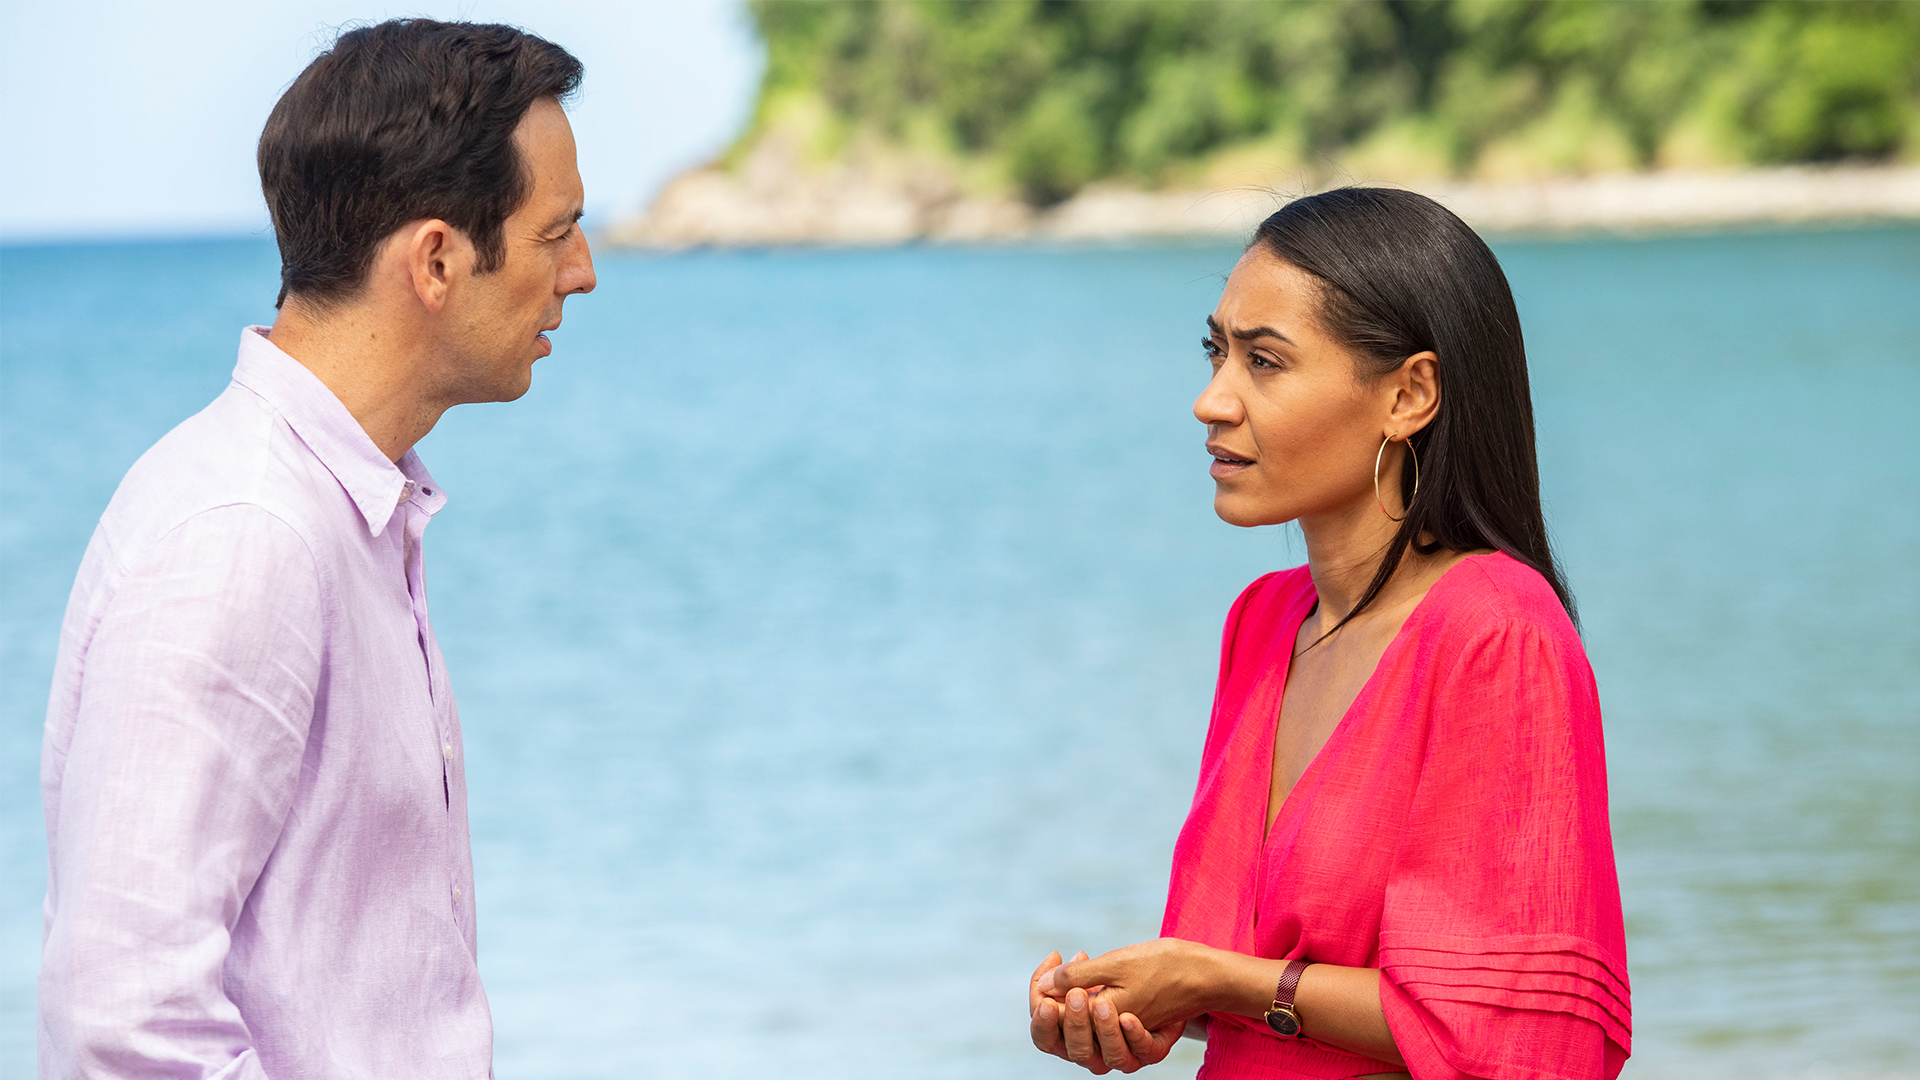 DI Neville Parker (RALF LITTLE) and Florence (JOSEPHINE JOBERT) in Death in Paradise